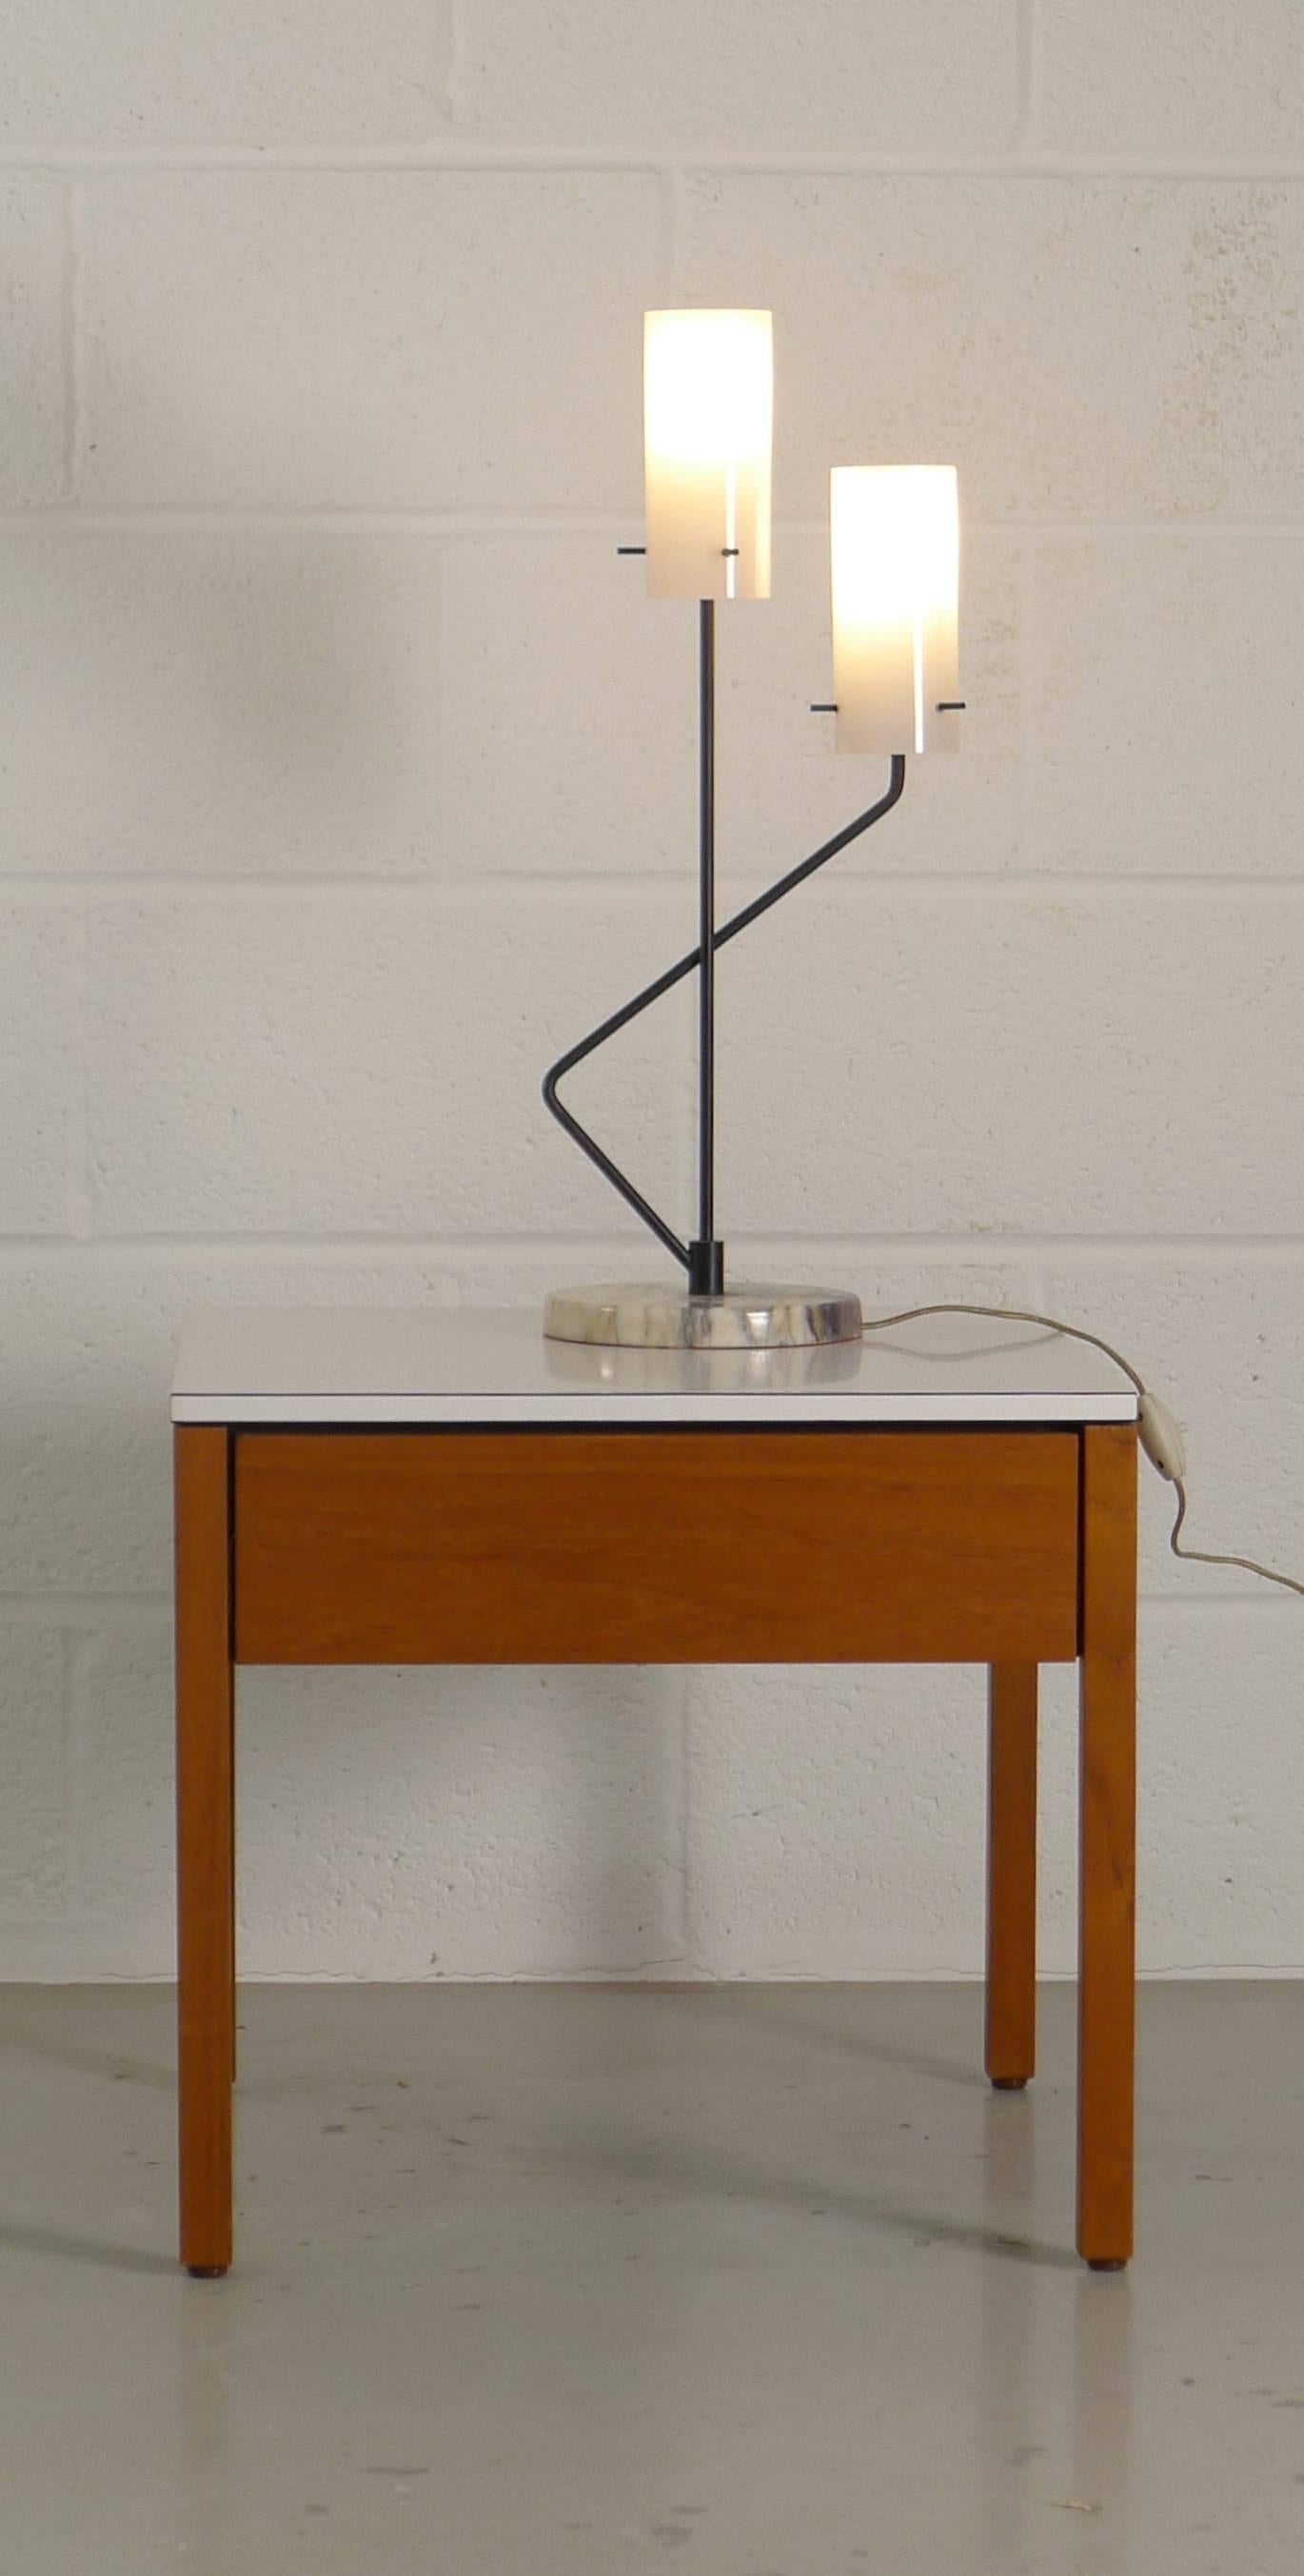 Stilnovo, Italy, desk lamp with marble base, sculpted enamelled metal supports and two glass shades, very elegant table light.